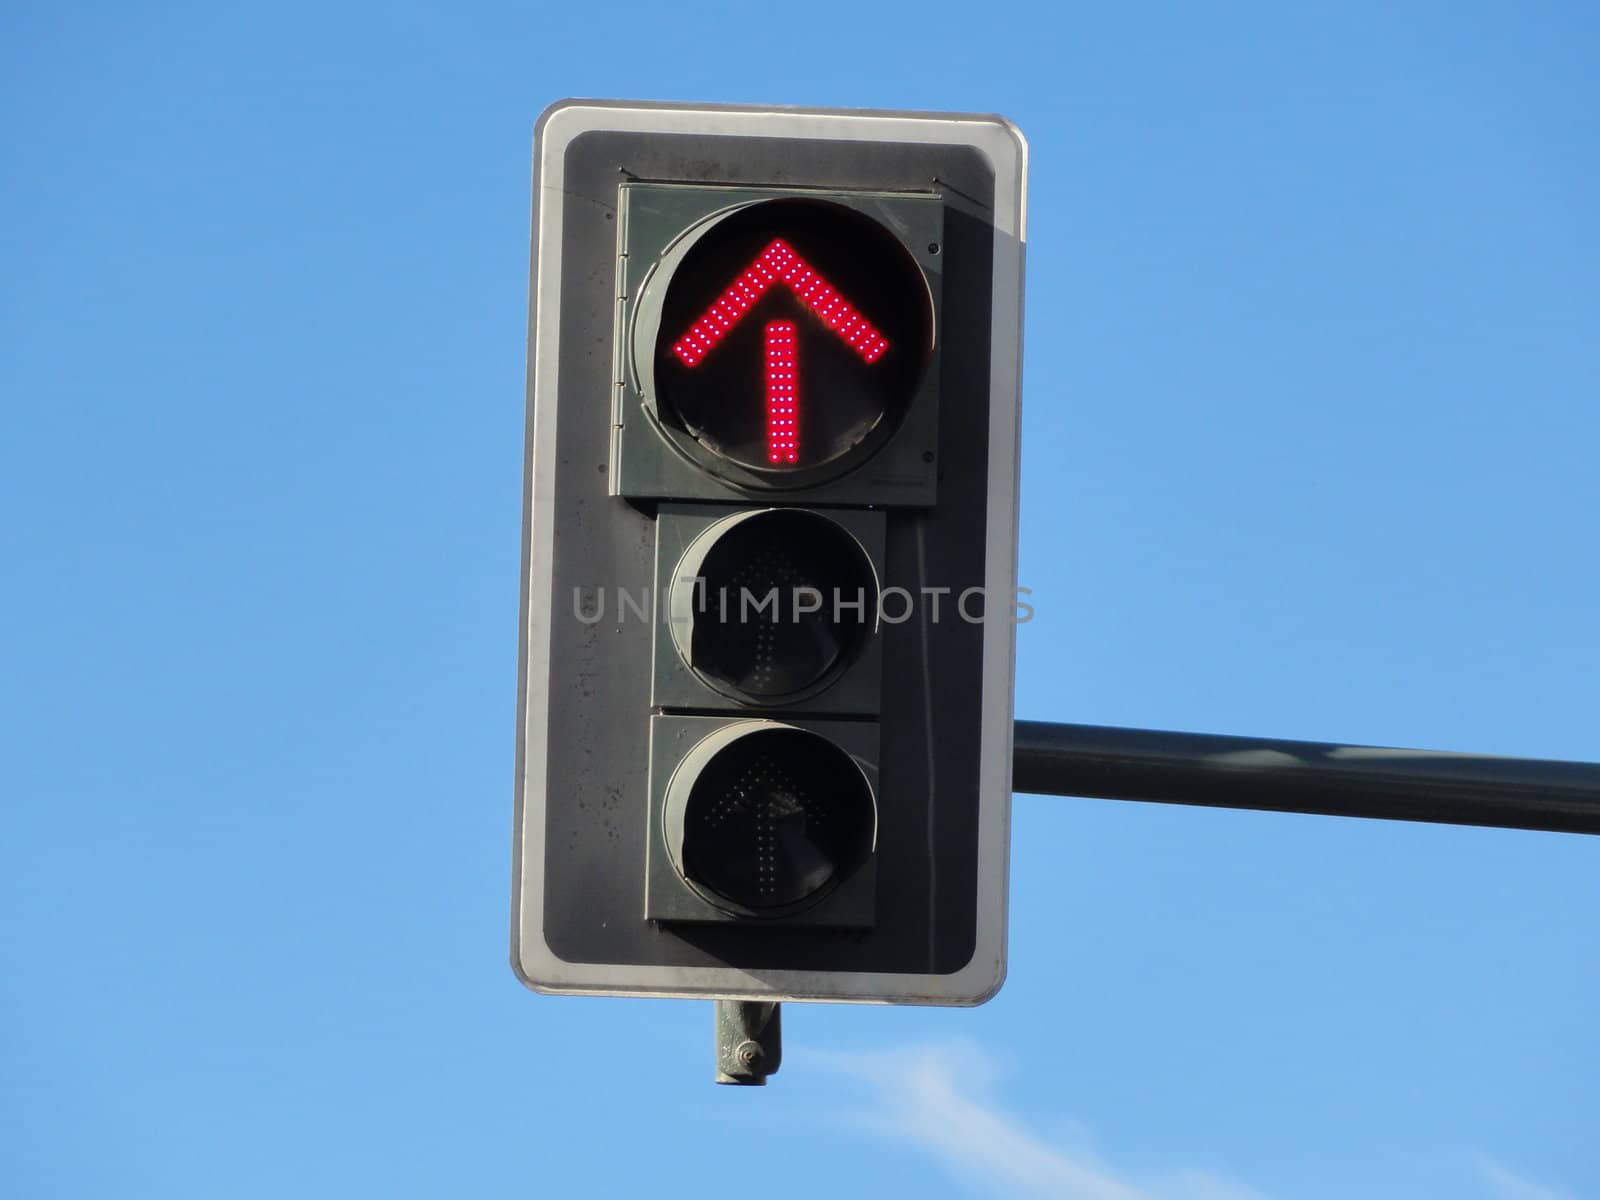 Photo of a traffic sign with a red arrow displayed